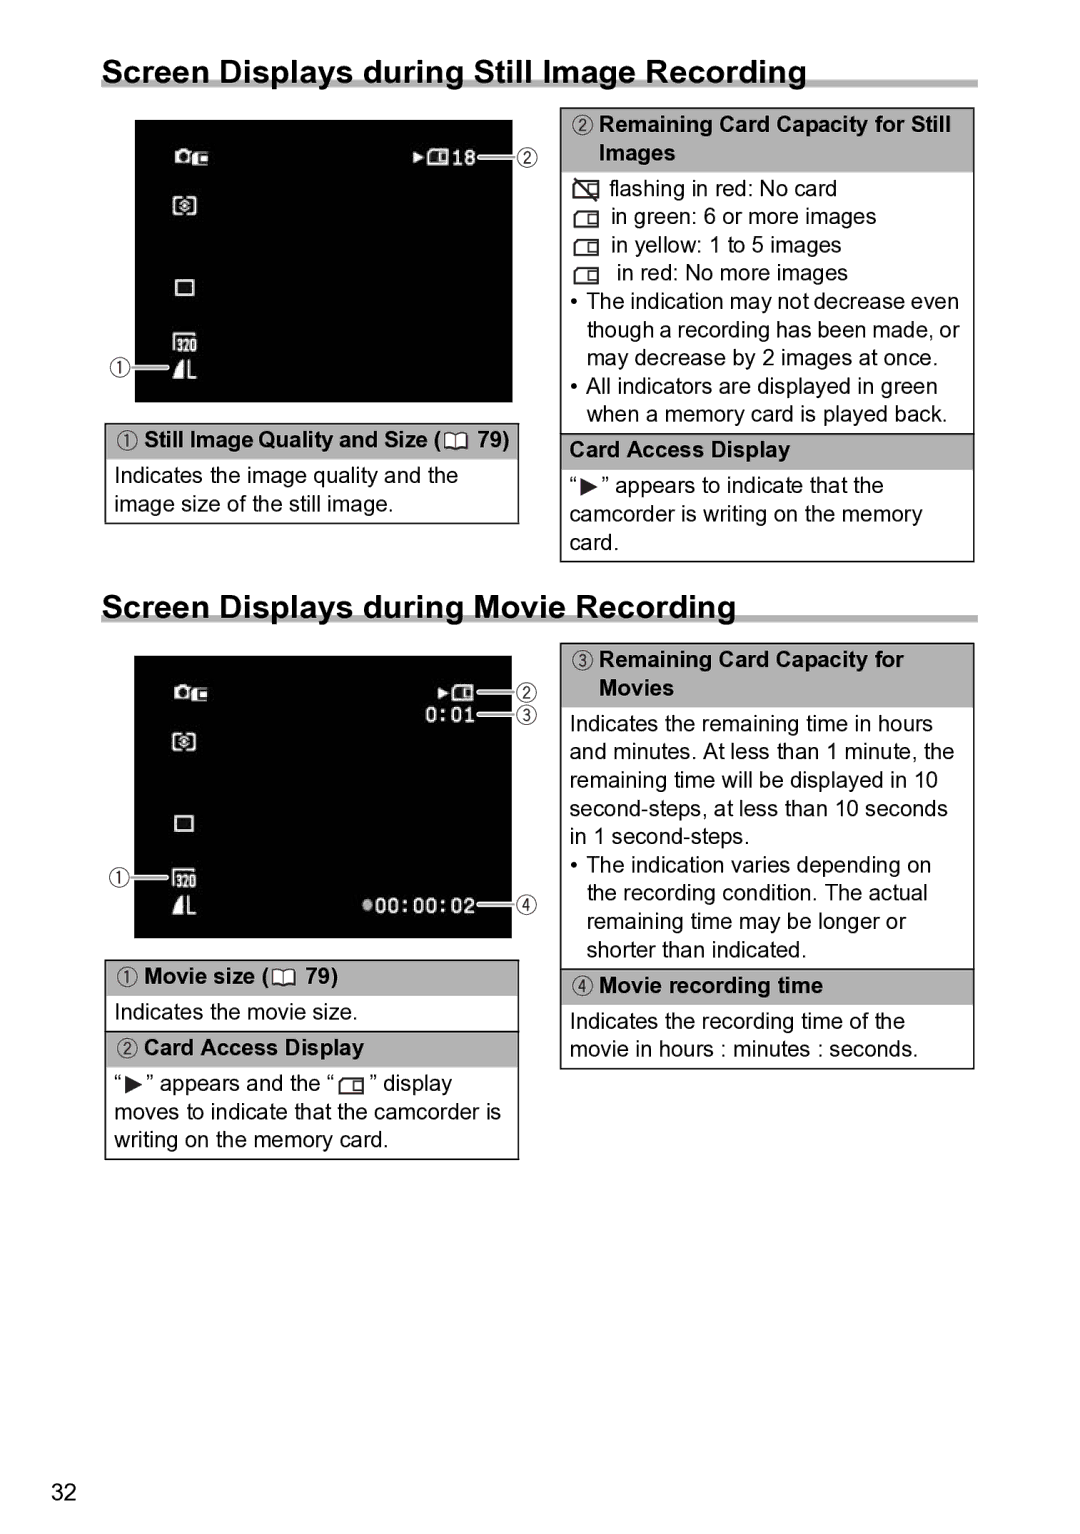 Canon S1 instruction manual Screen Displays during Still Image Recording, Screen Displays during Movie Recording 